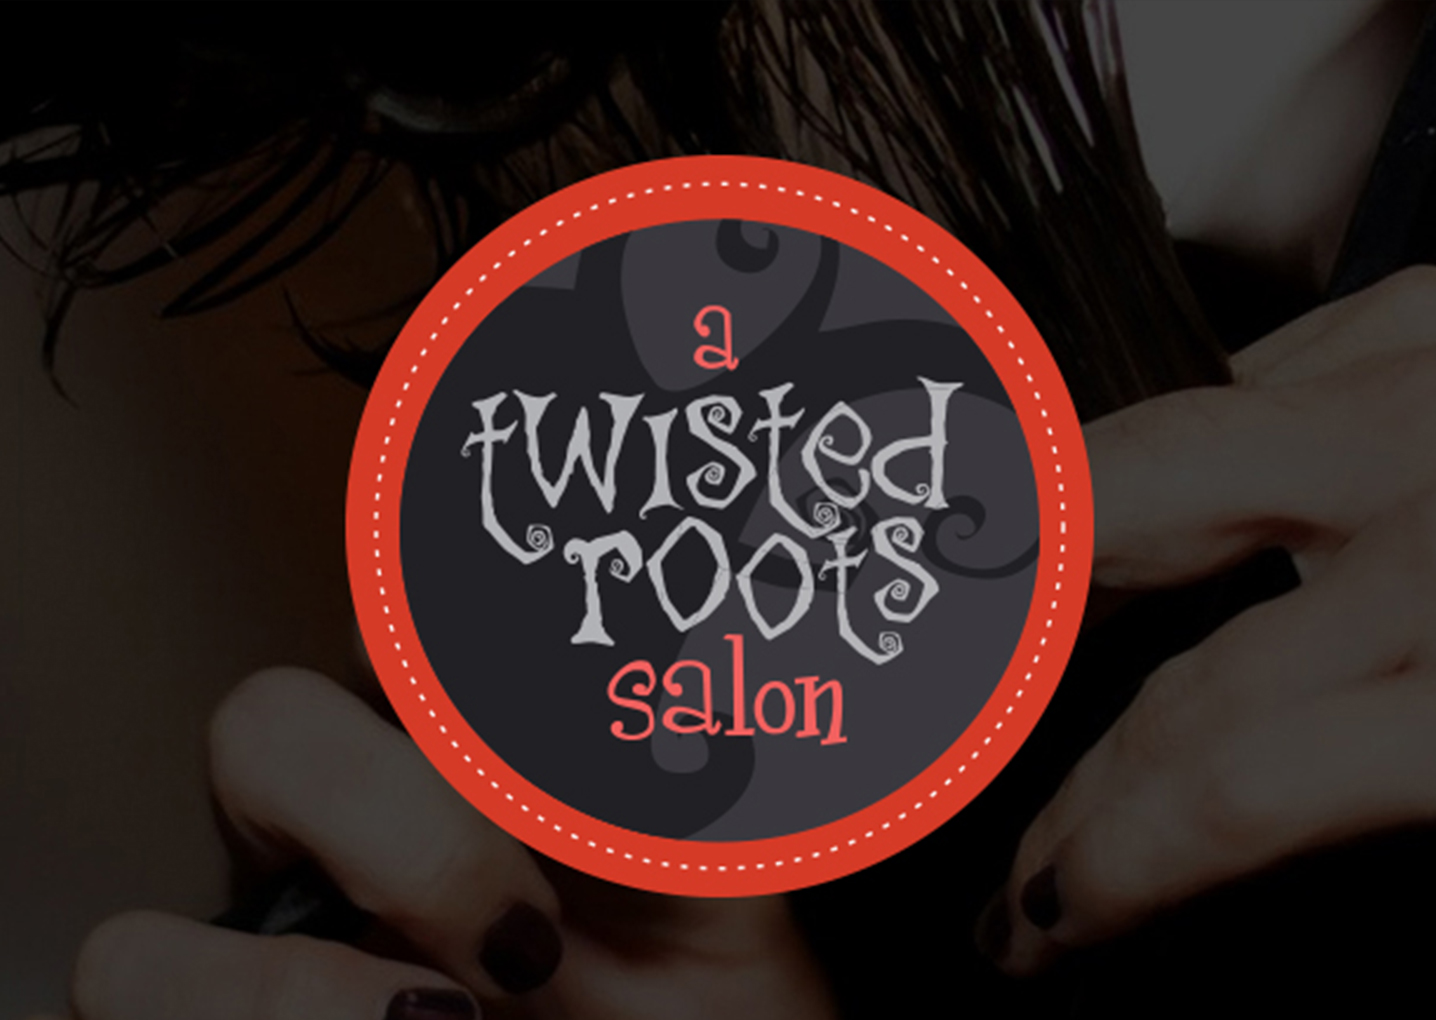 A Twisted Roots Salon